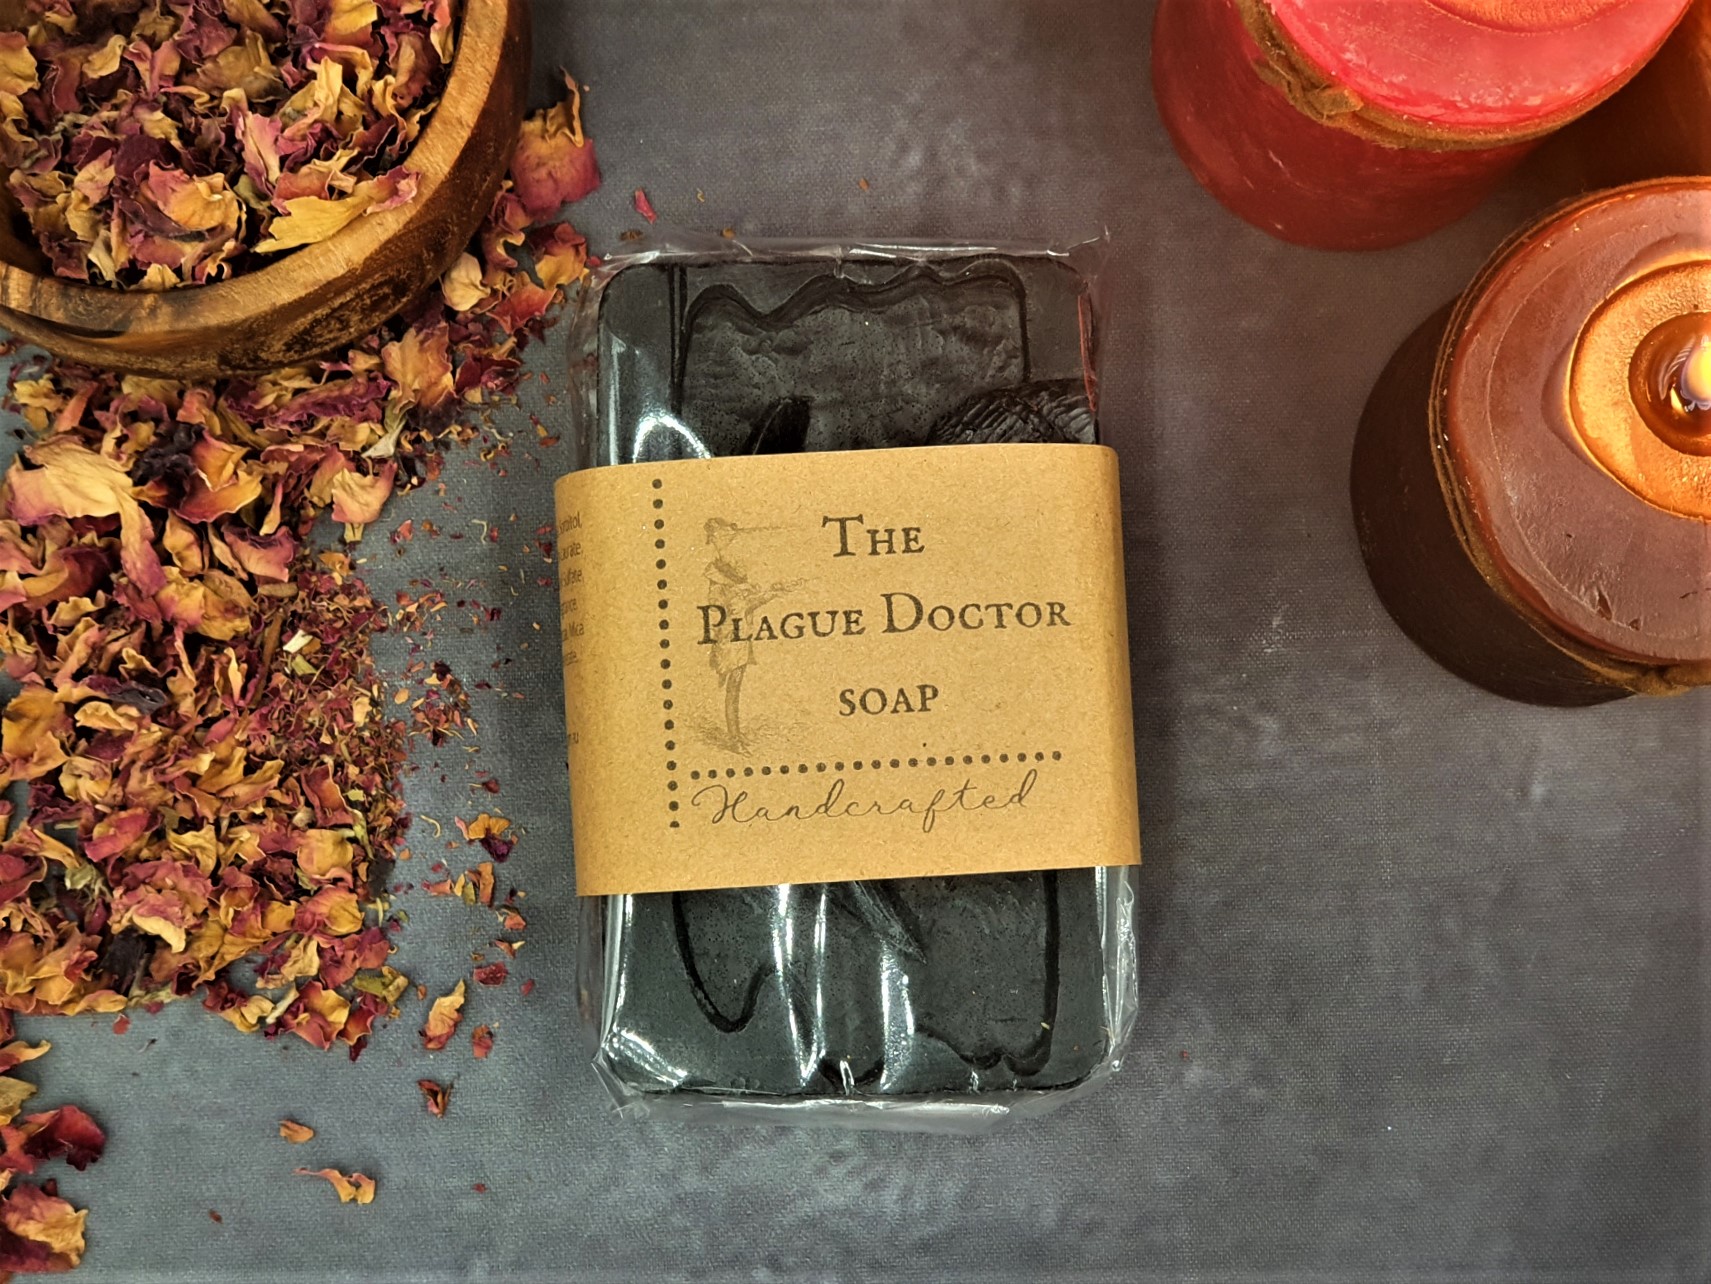 The Plague Doctor soap